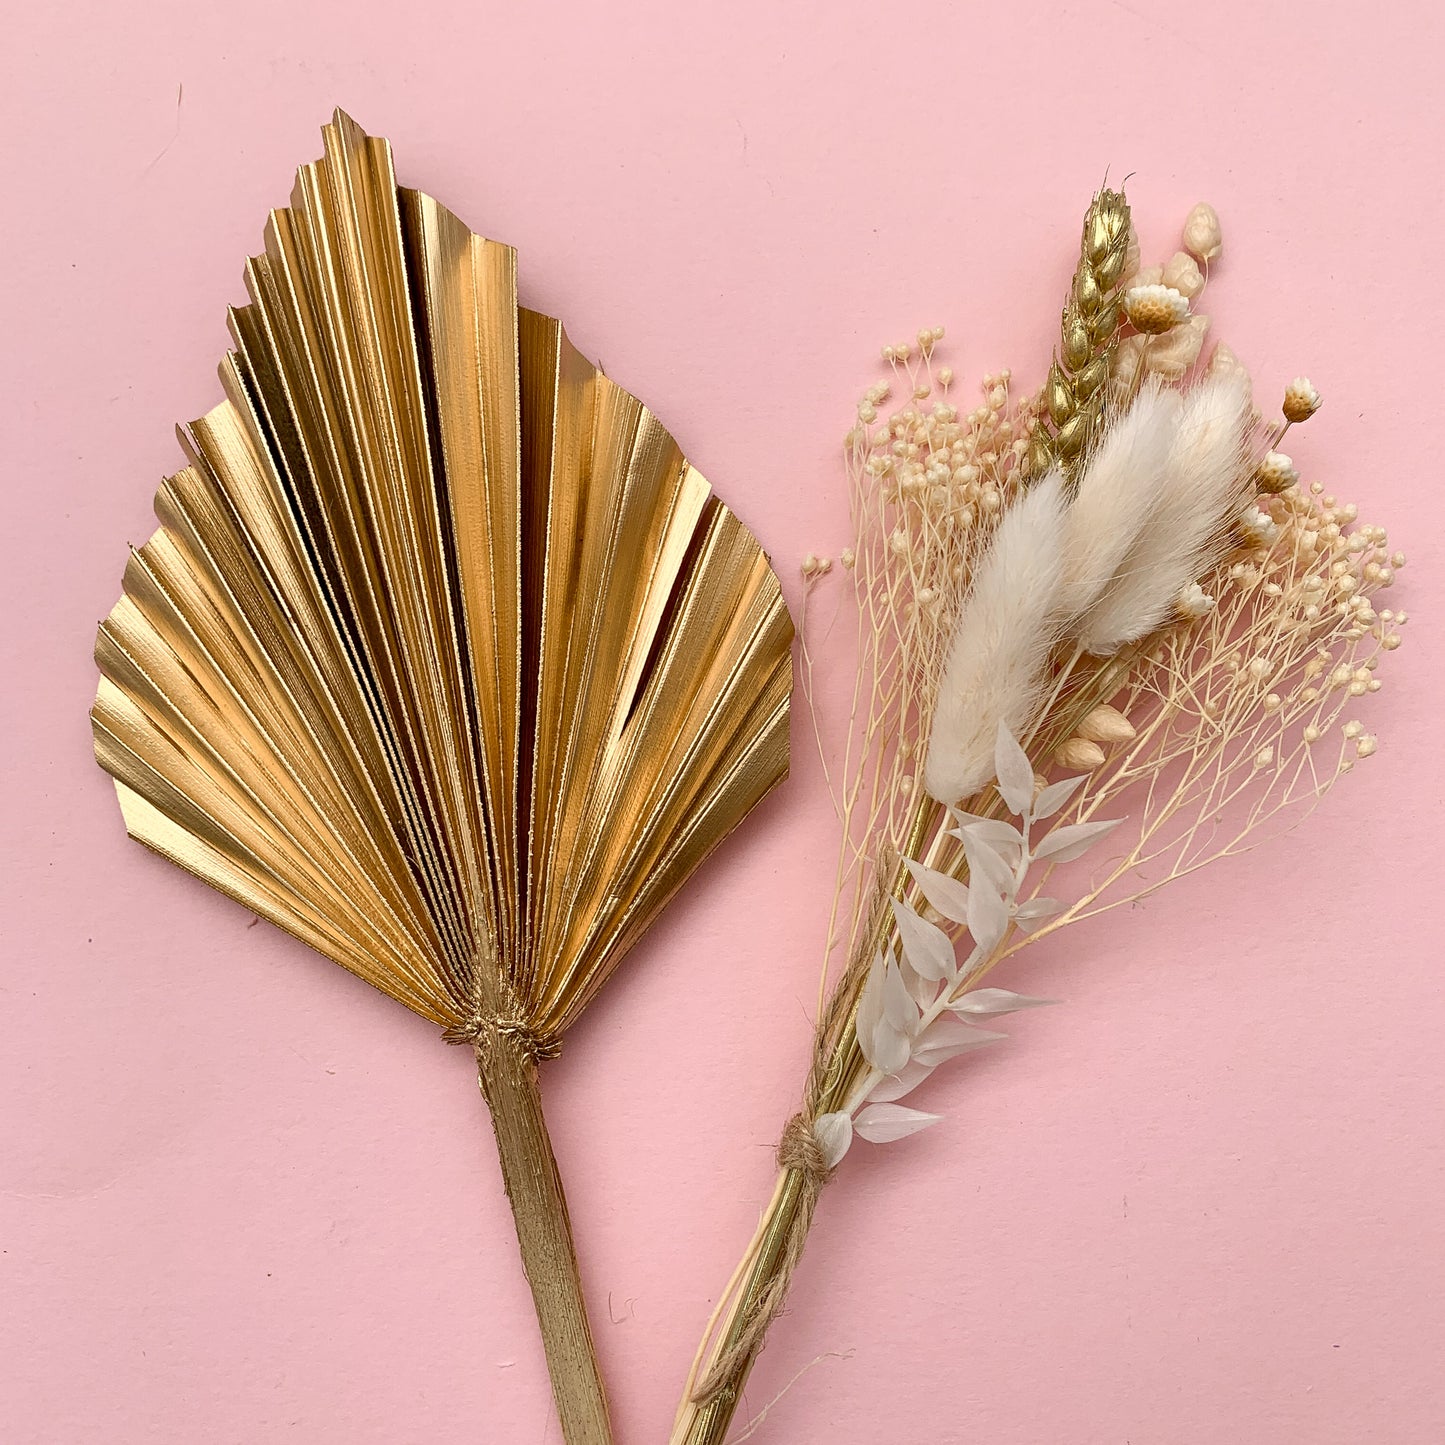 Gold palm dried palm spear set - not so perfect